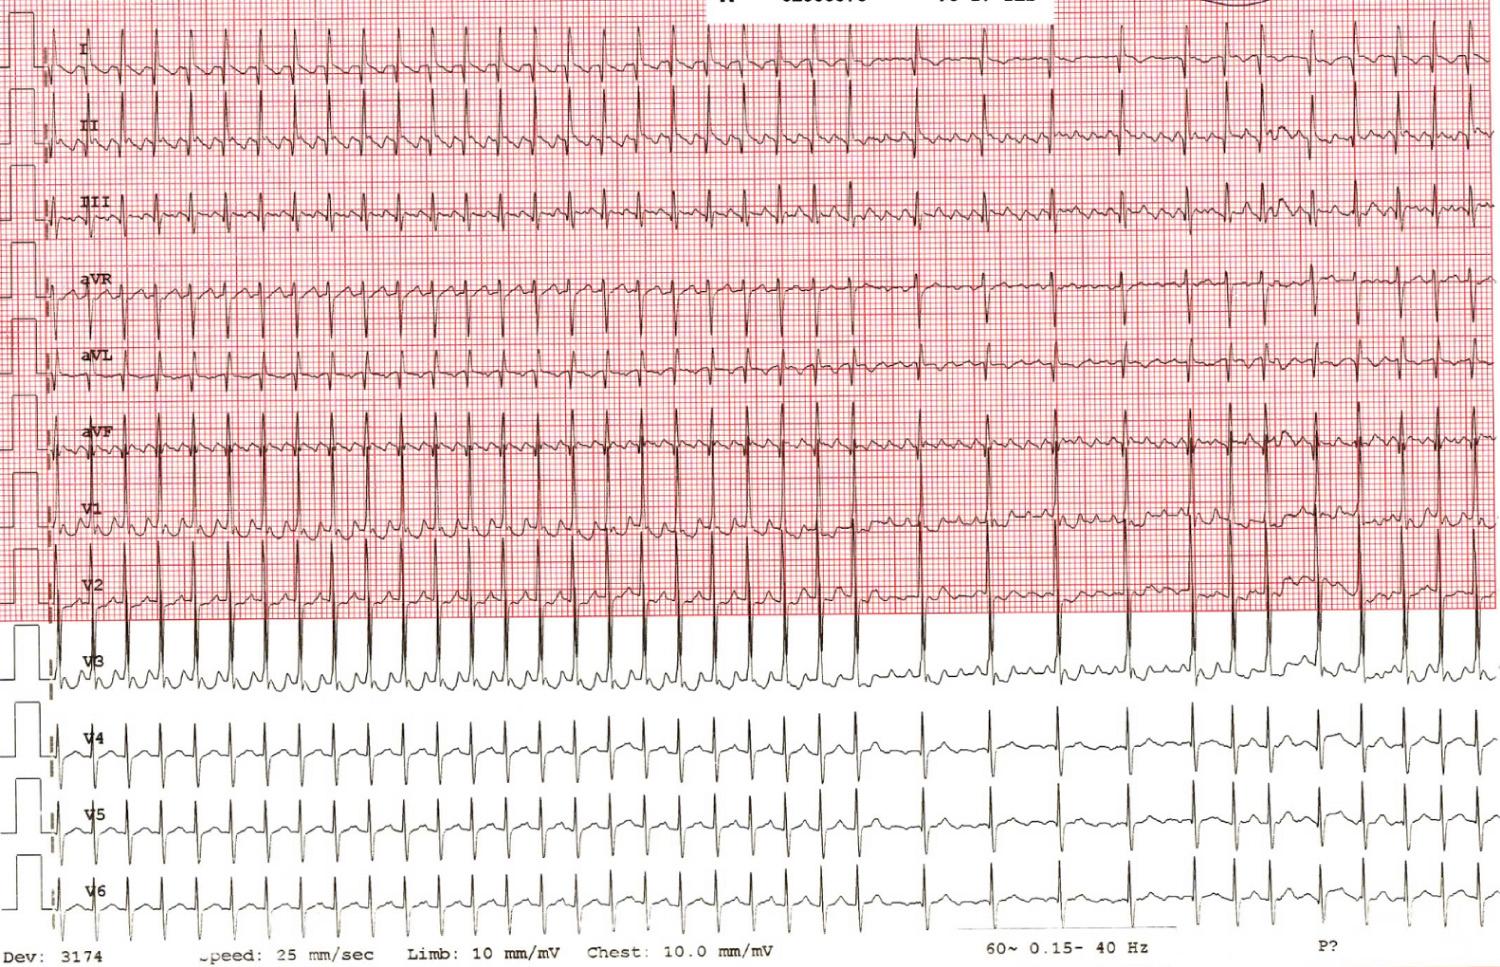 Fig. 22.16, A 12-lead rhythm strip showing a narrow complex tachycardia in a 12-hour-old baby. The sawtooth pattern of atrial flutter becomes even more manifest with transient atrioventricular nodal block.